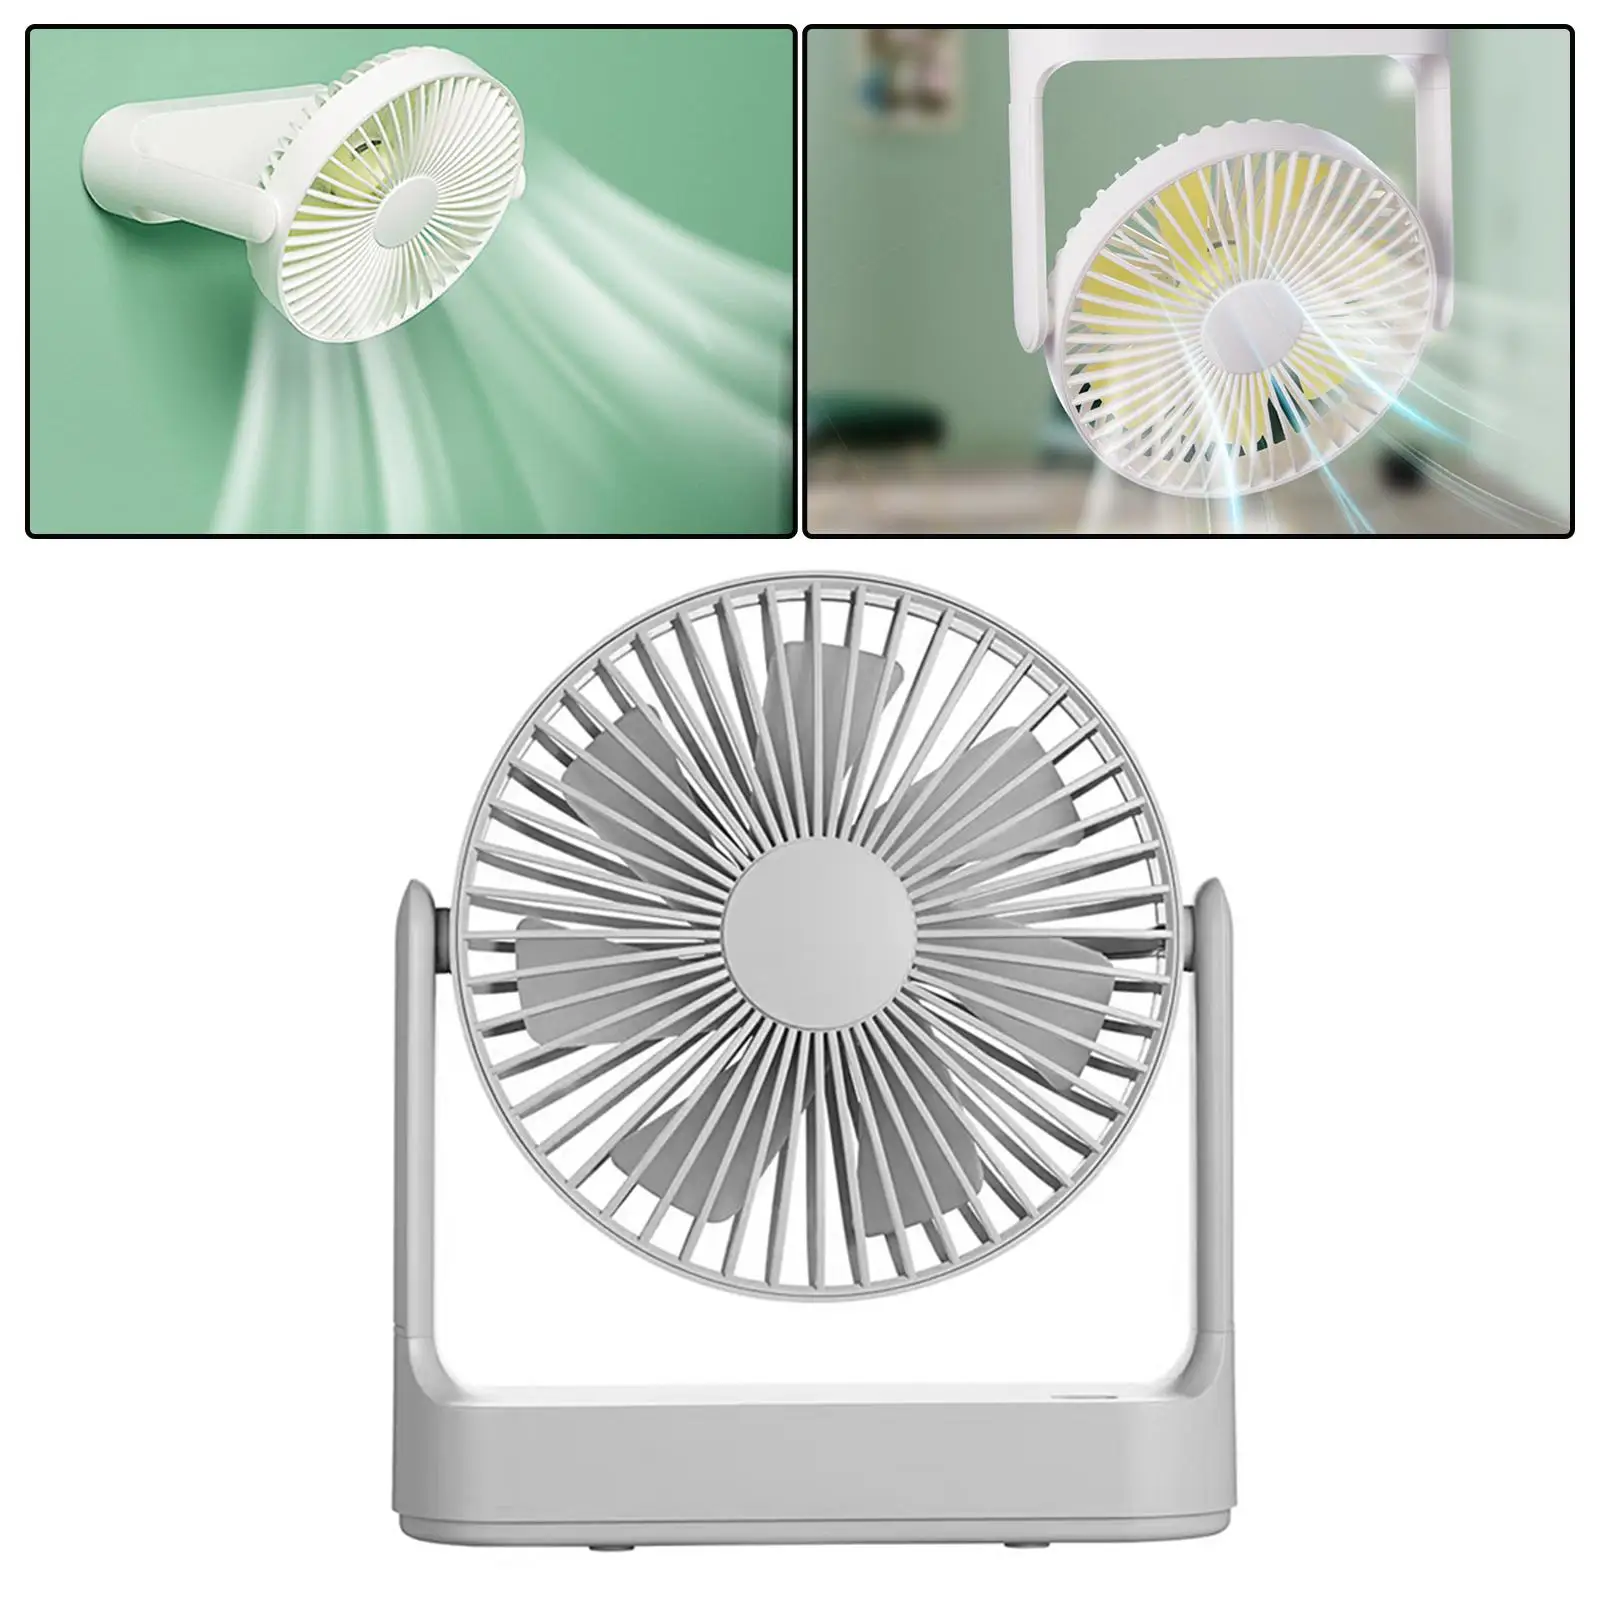 Portable Personal Table Fan USB Corded Wall Mounted Fodable Cooling Air Circulator Space Saving Strong Wind for Bedroom Gray